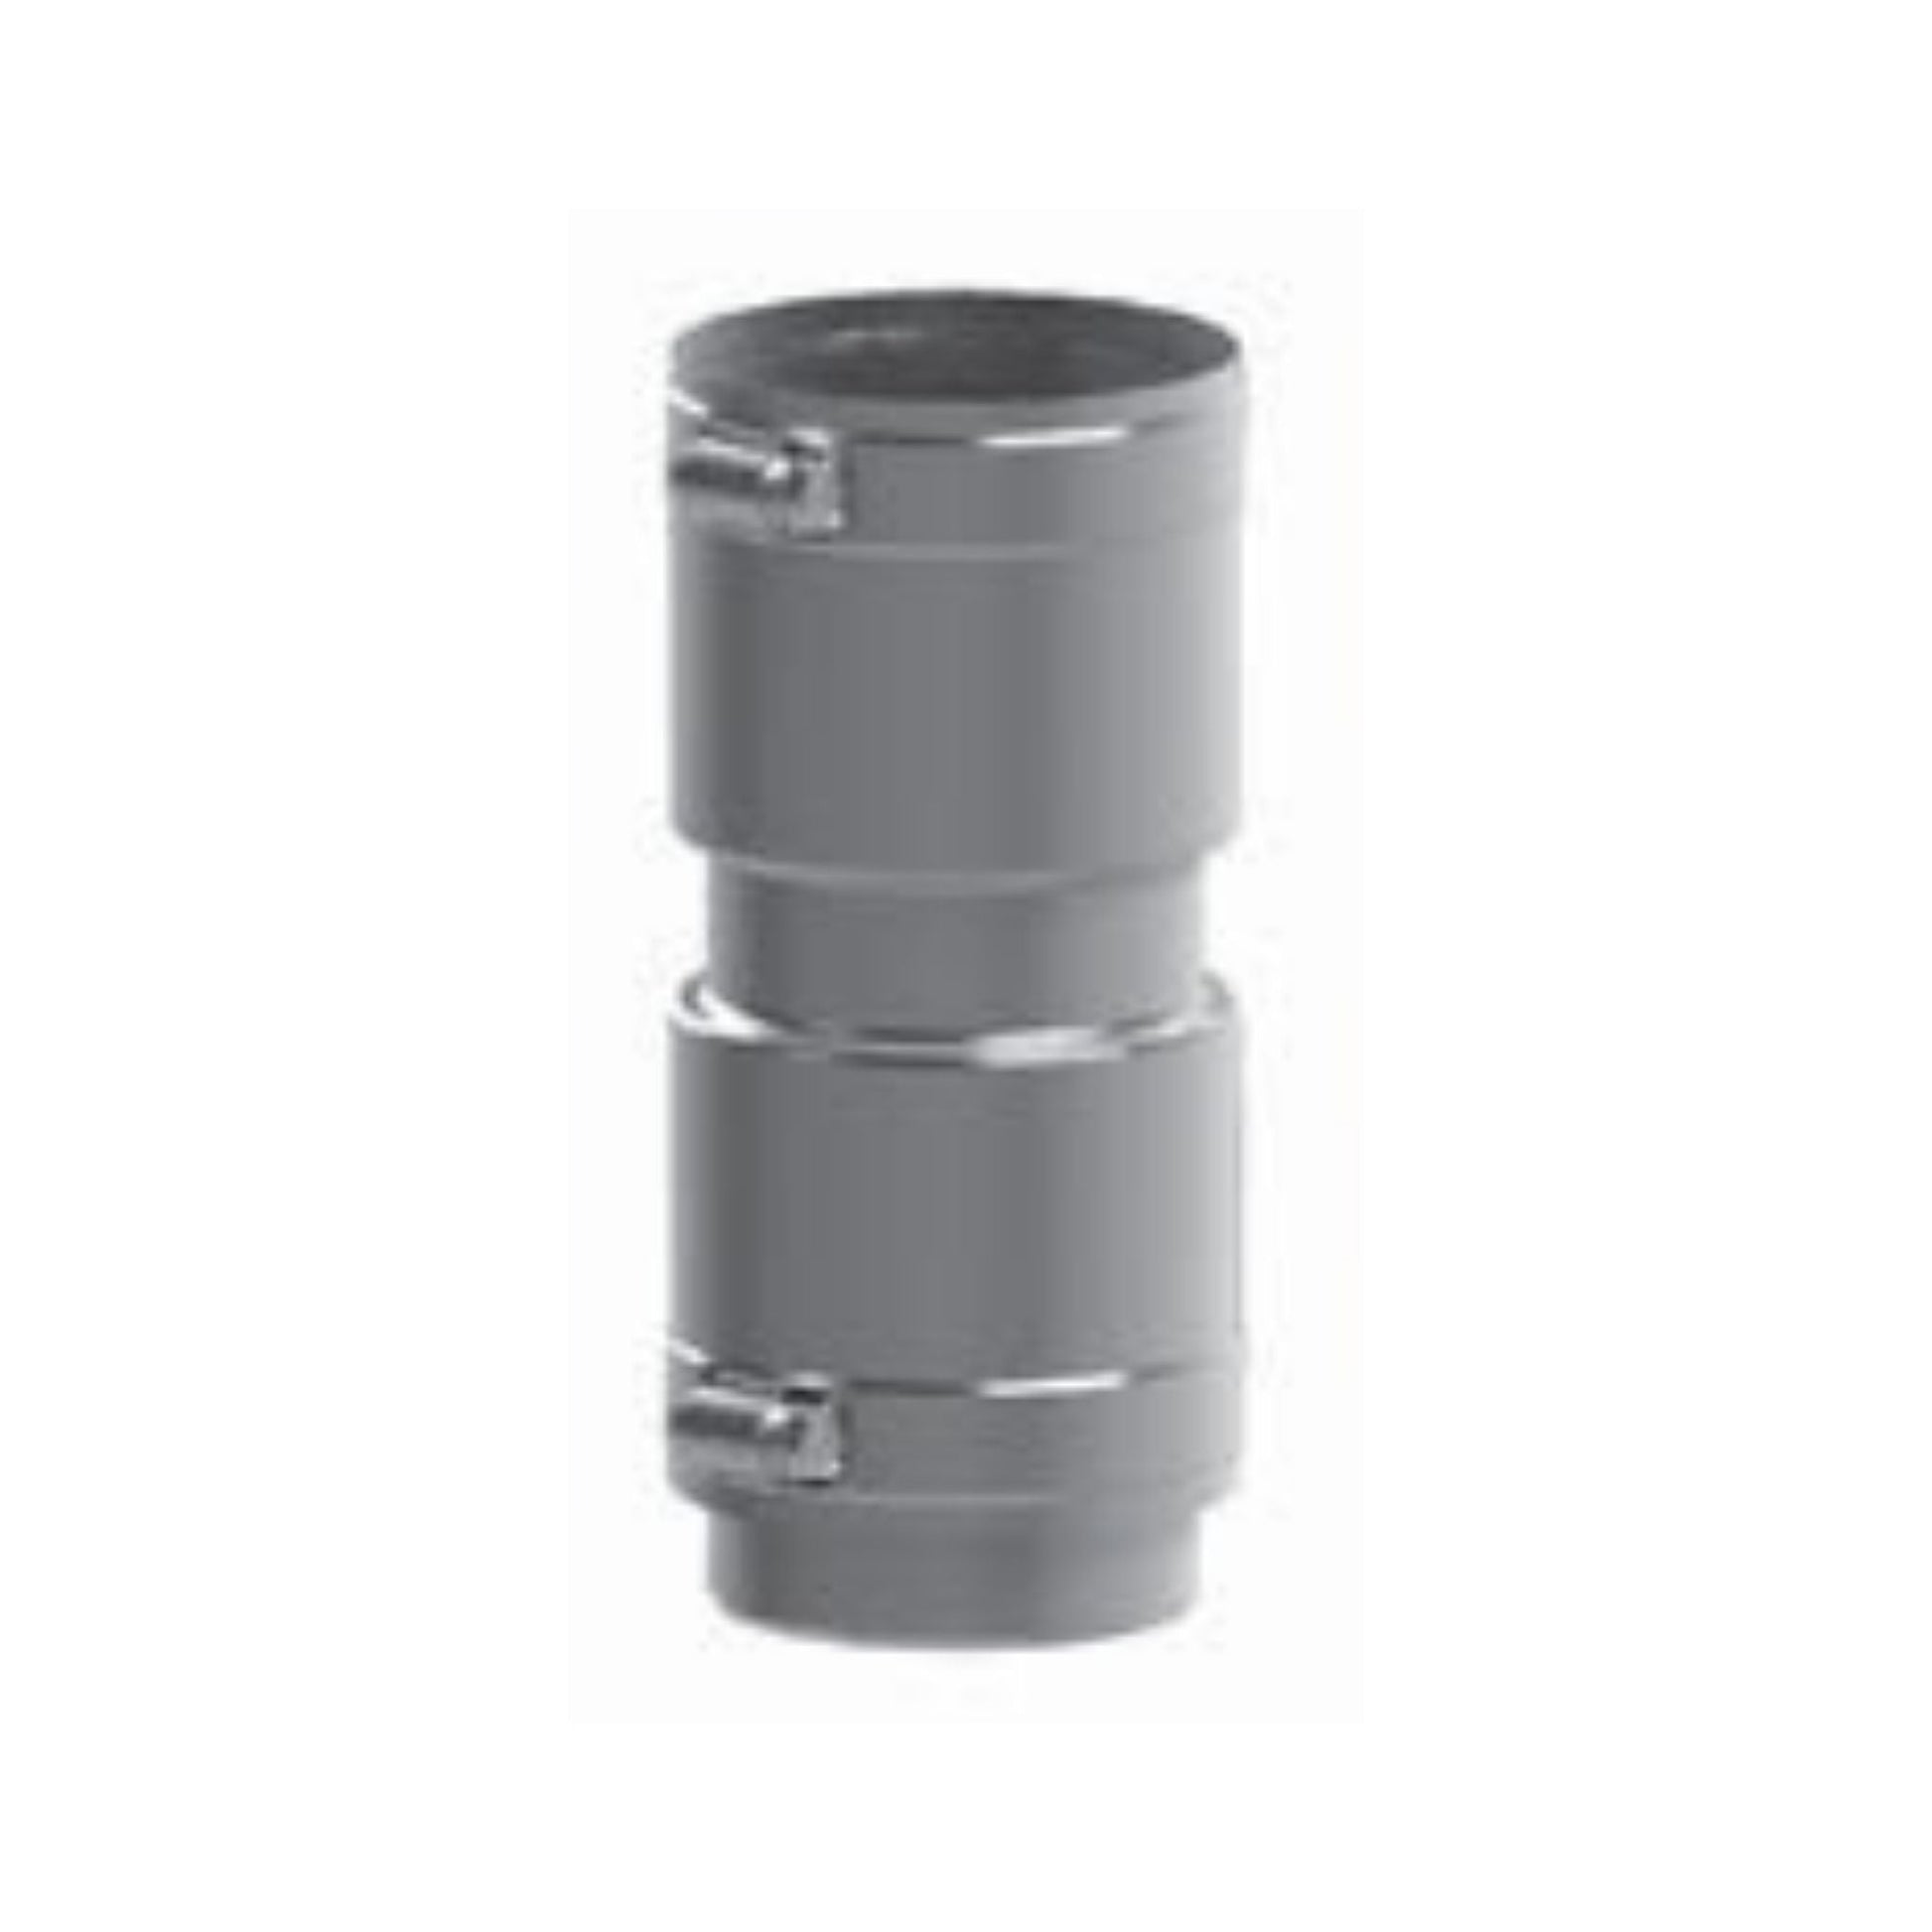 DuraVent FasNSeal Flex 4" 316L Stainless Steel Coupler